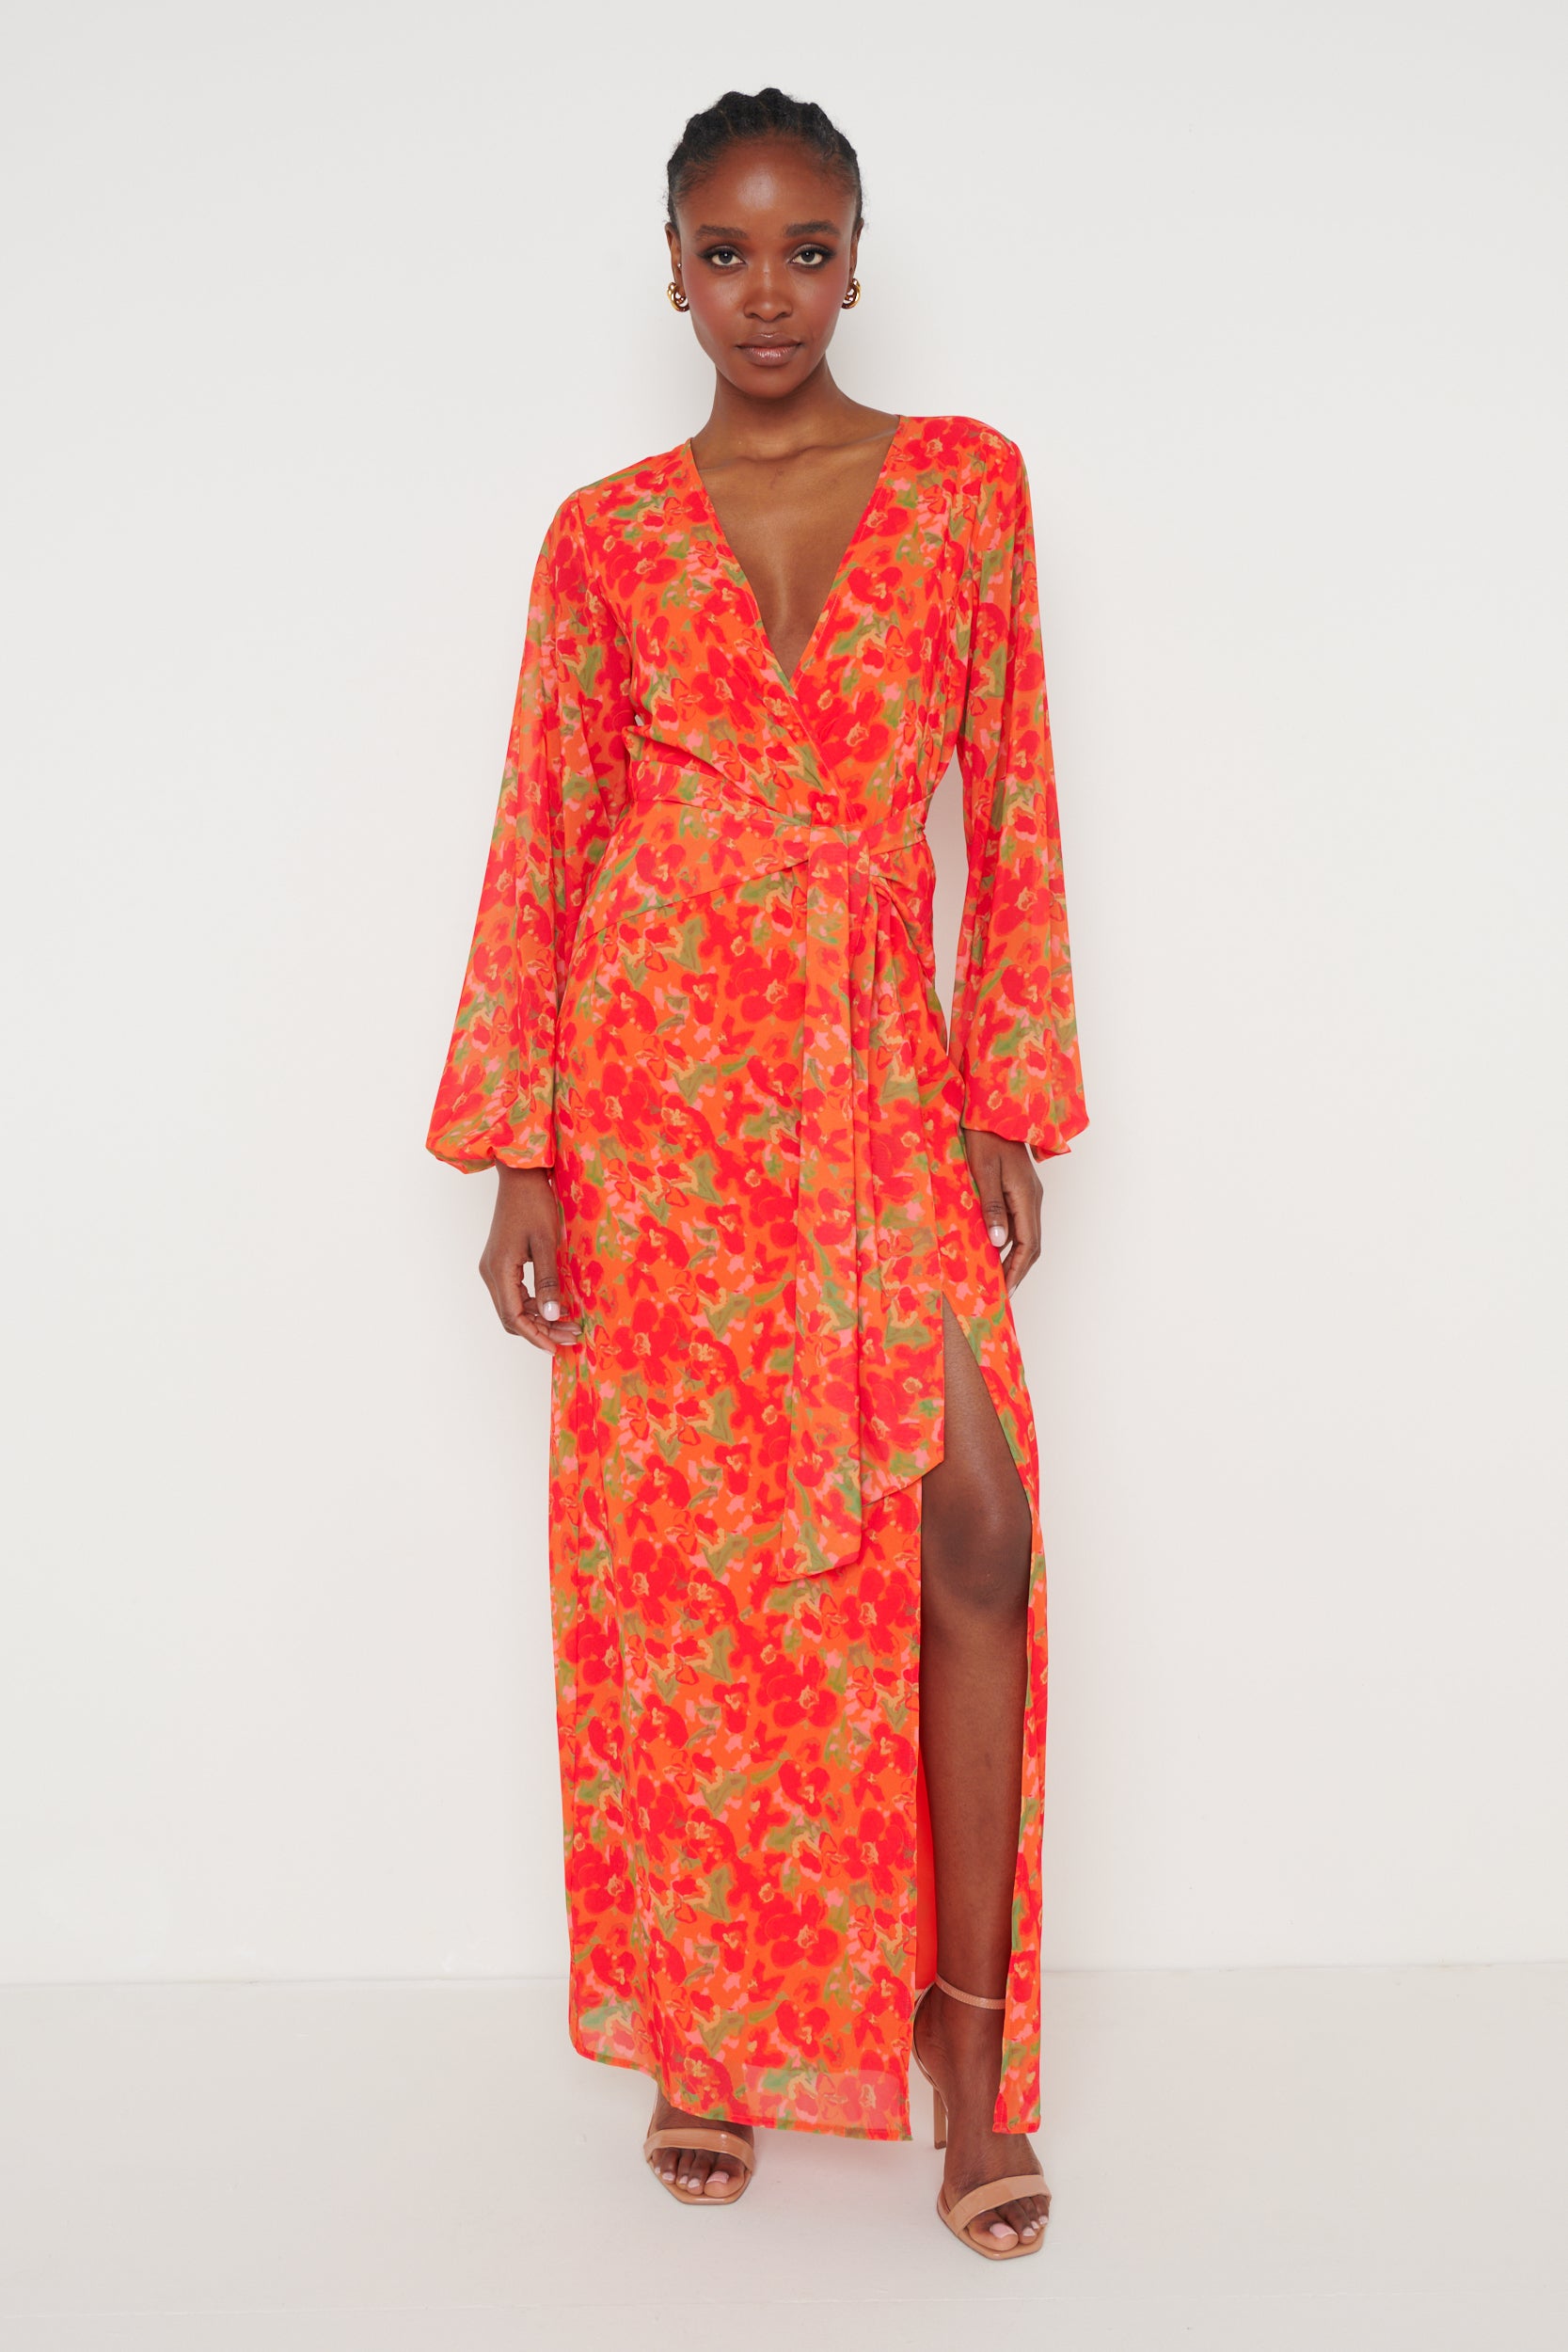 Alexis Knot Drape Dress - Red and Orange Floral, 14